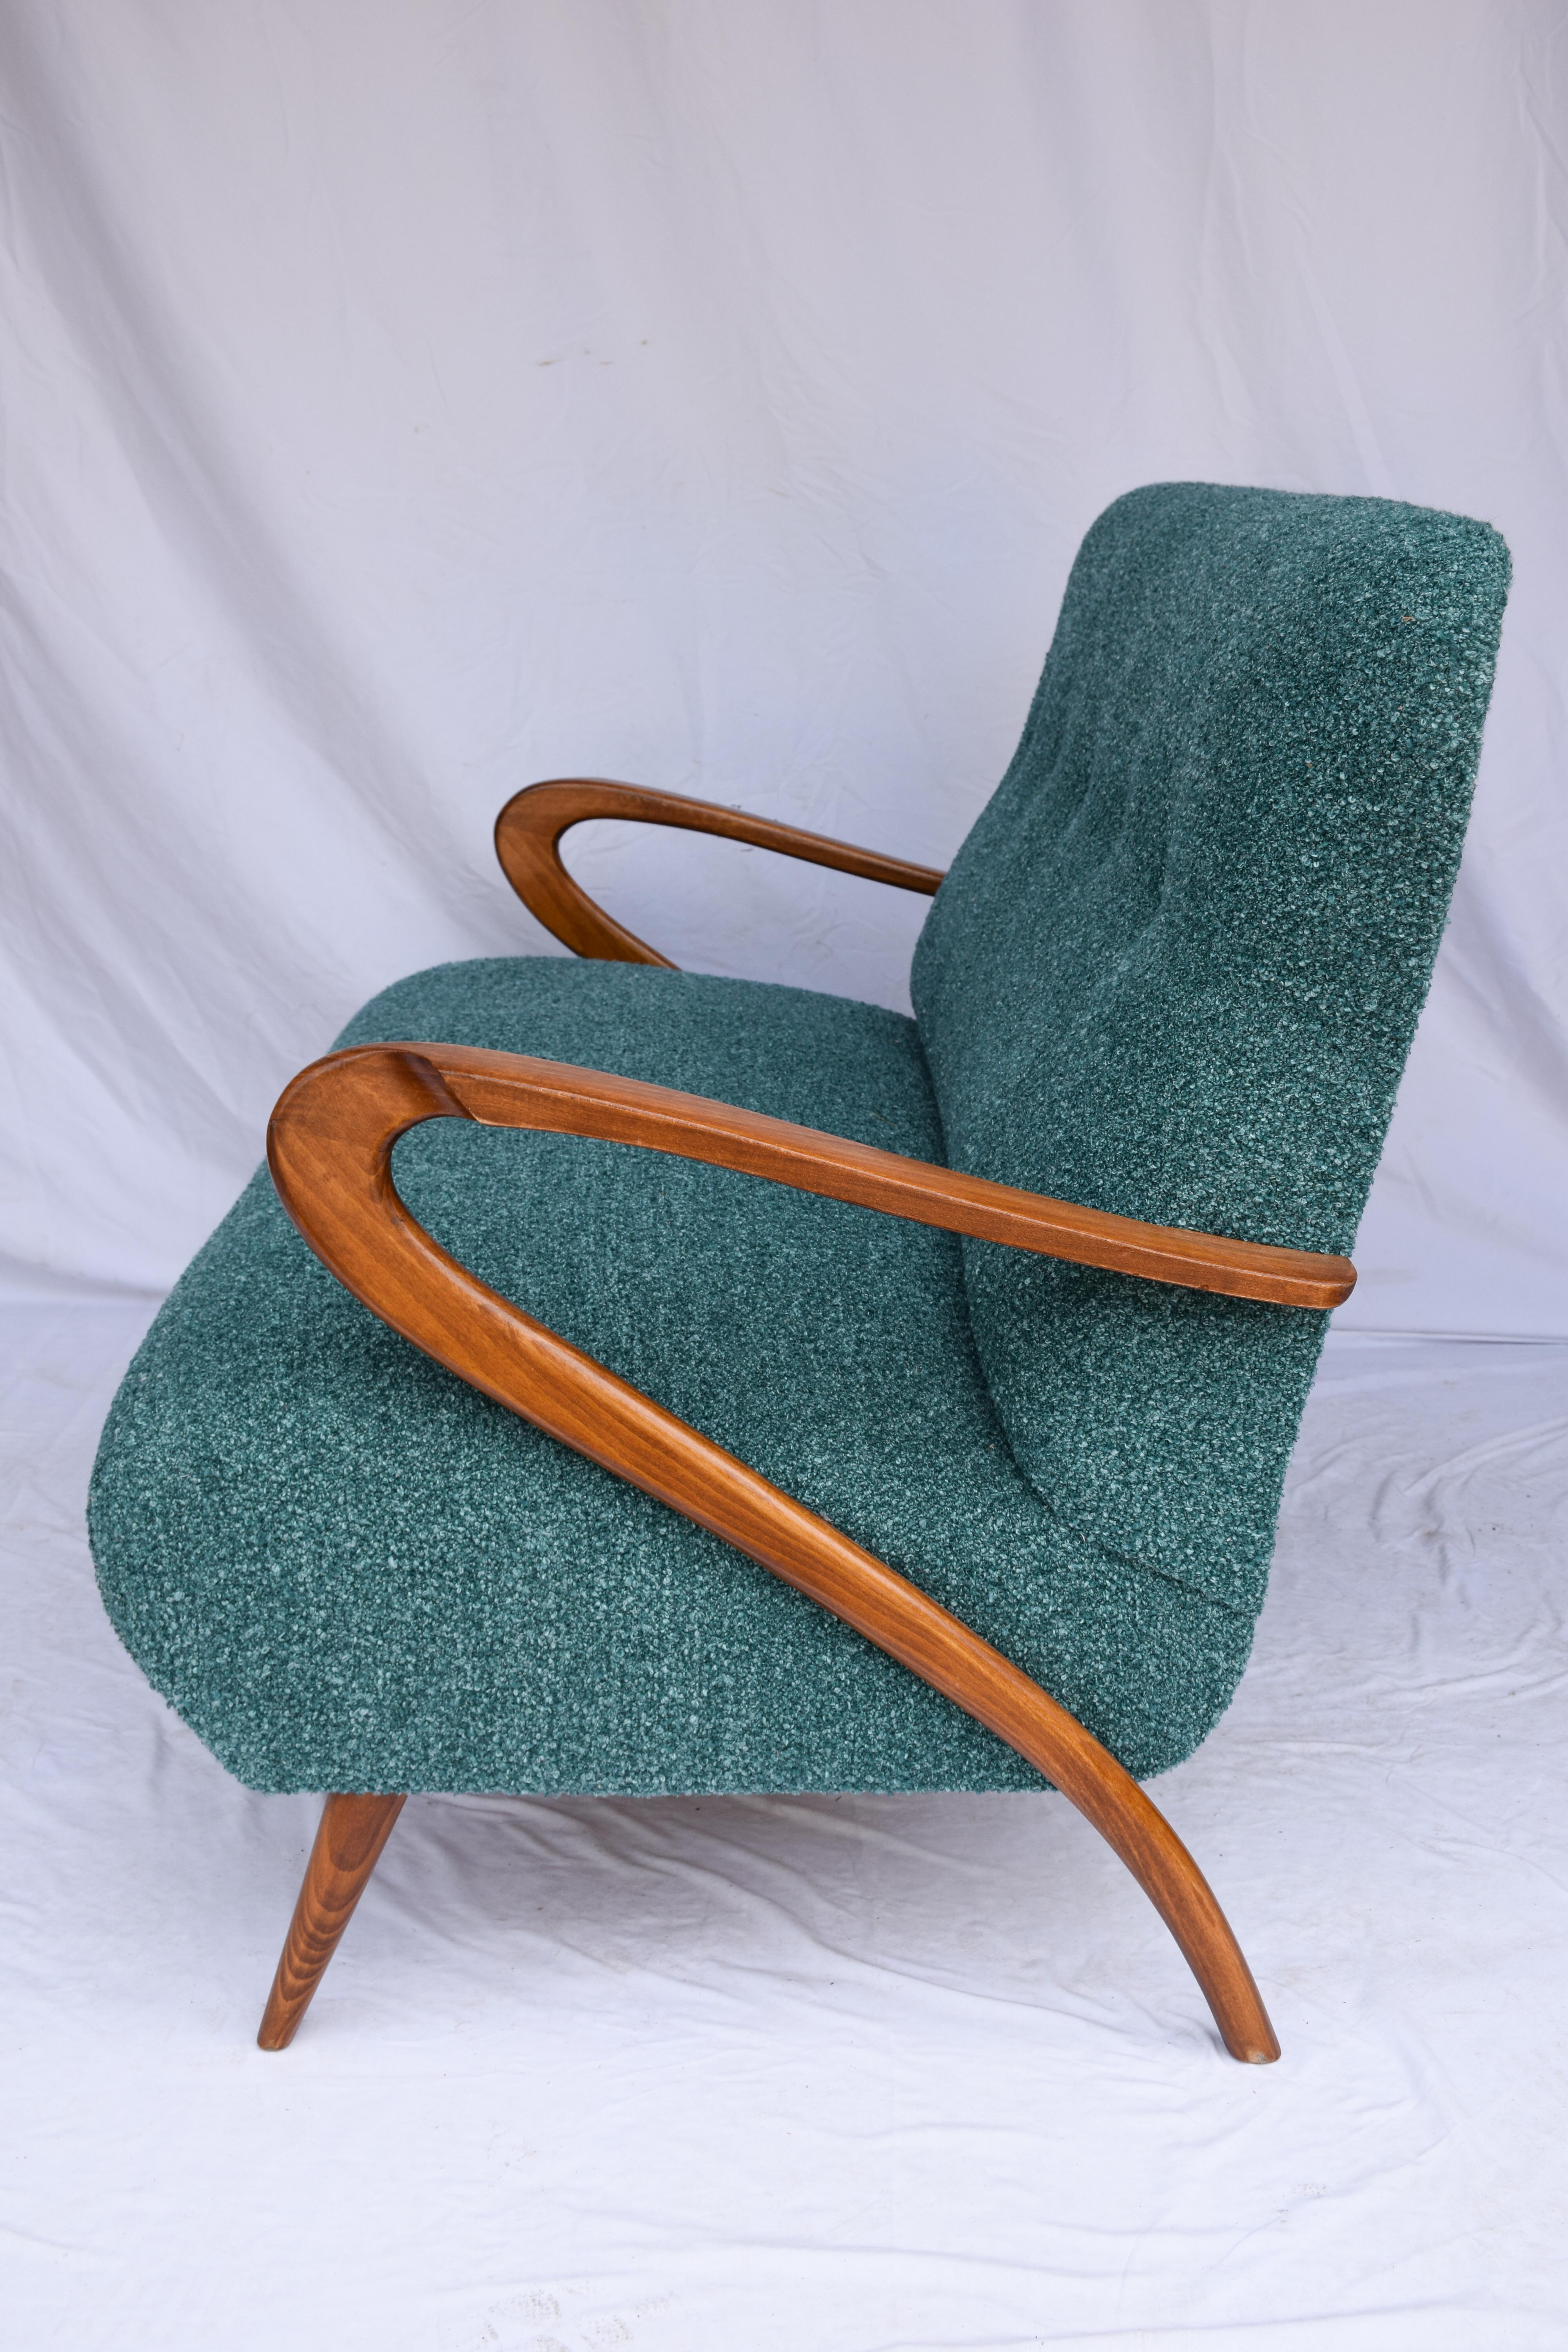 Upholstery Italian Mid-Century Settee - Sofà Carlo Mollino Style in Teal Green For Sale